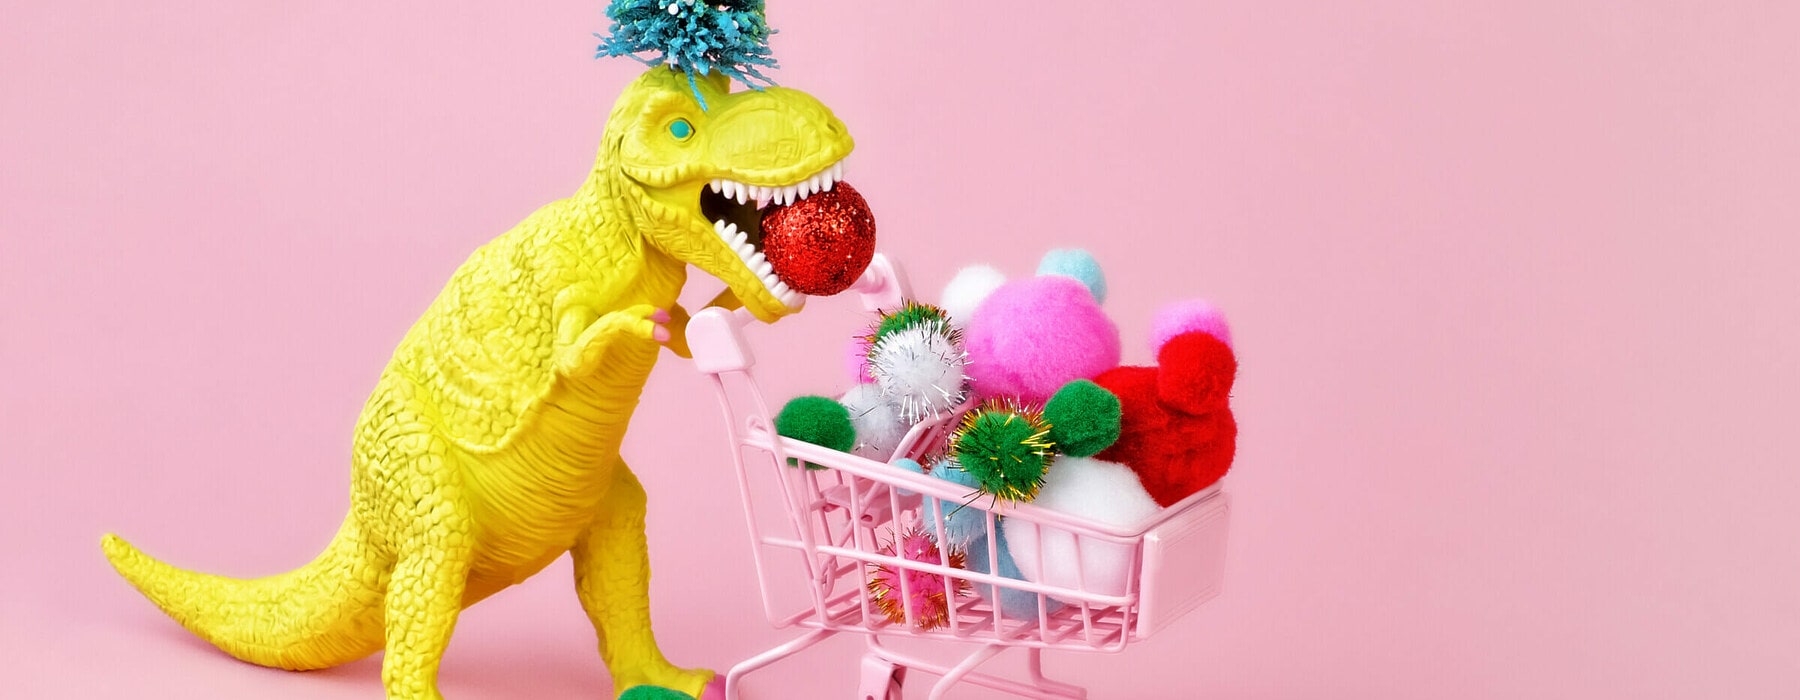 Yellow toy Tyrannosaurus rex wearing a Christmas tree on his head and filling a shopping cart with multicolored puff balls on pink background.